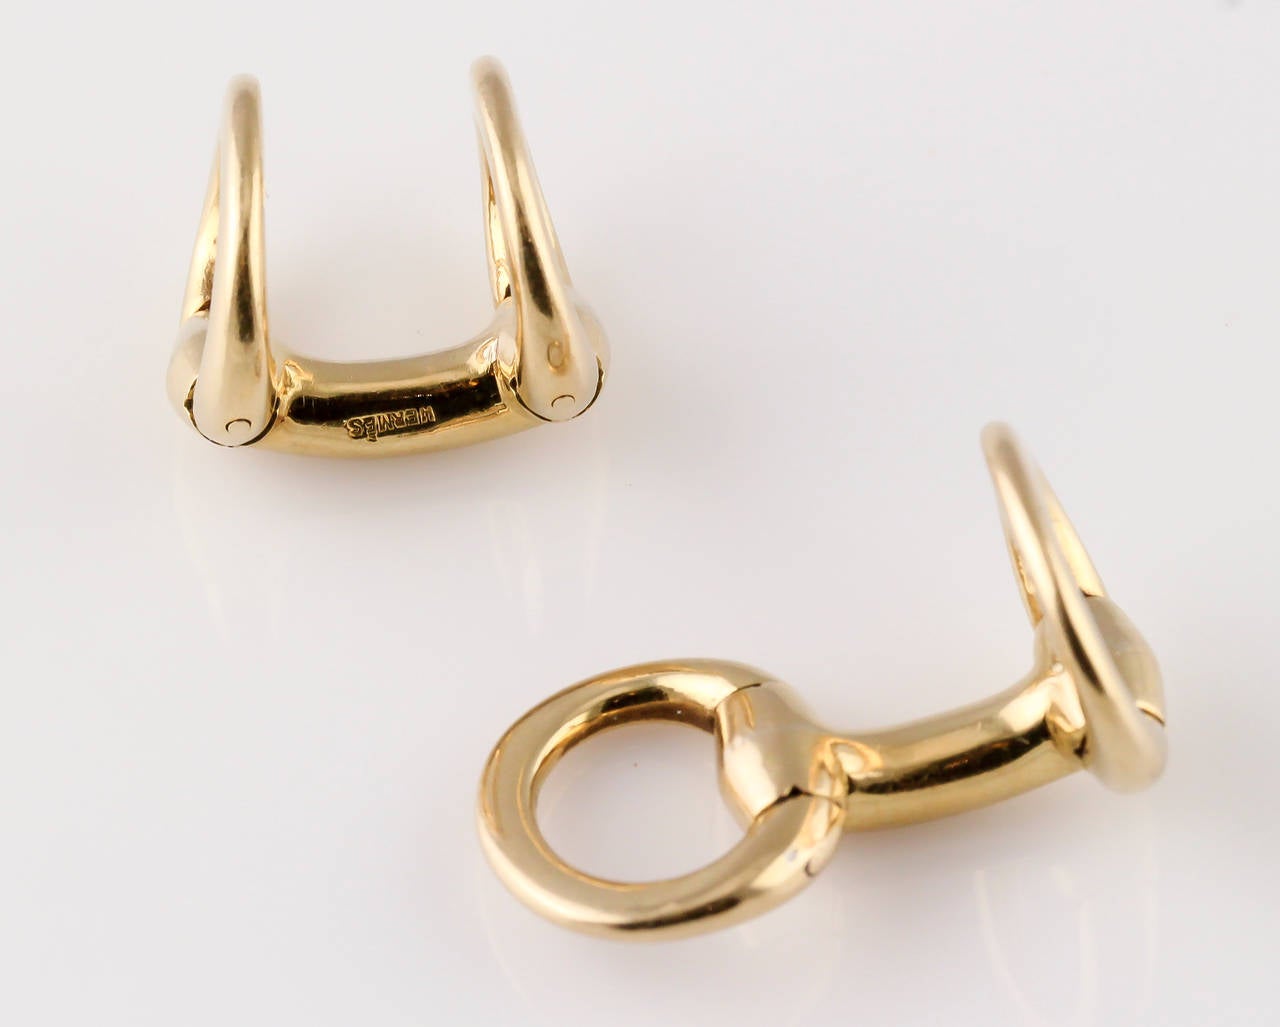 Handsome 18K yellow gold cufflinks by Hermes, in the shape of horse bits.
Hallmarks: Hermes, maker's mark, French 18K gold assay marks.